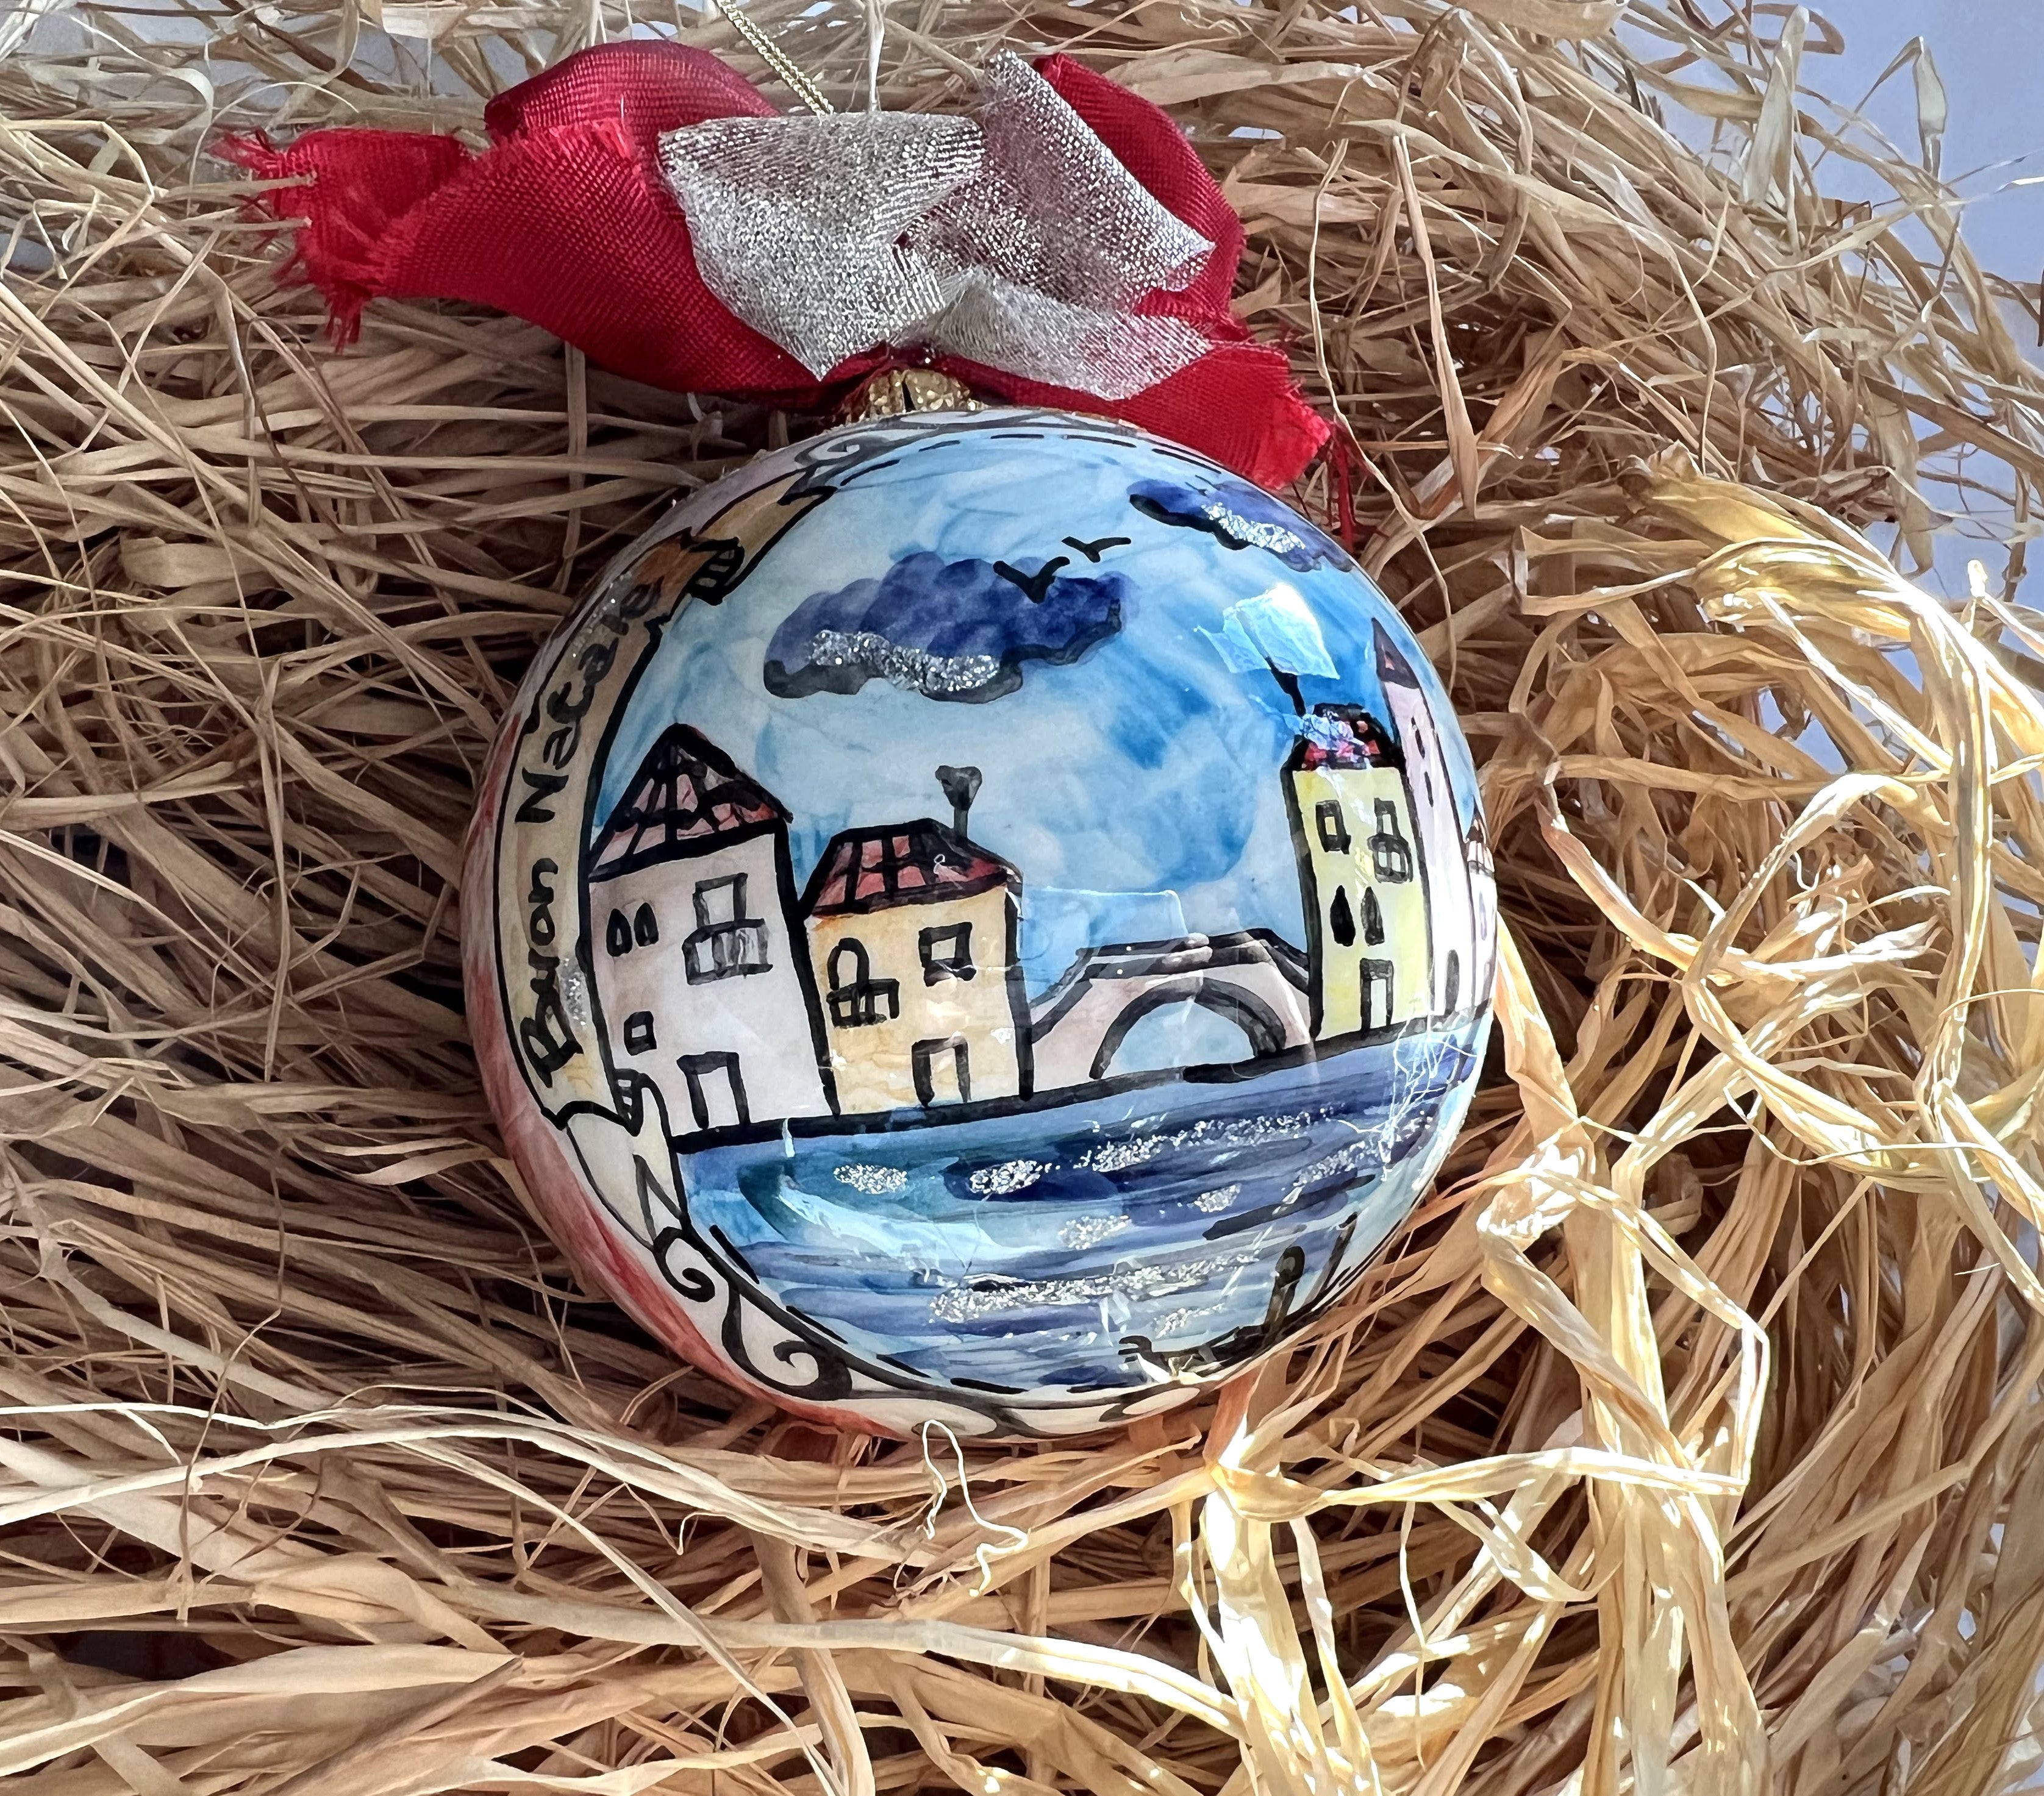 Decorated Holiday Ornaments From Italy